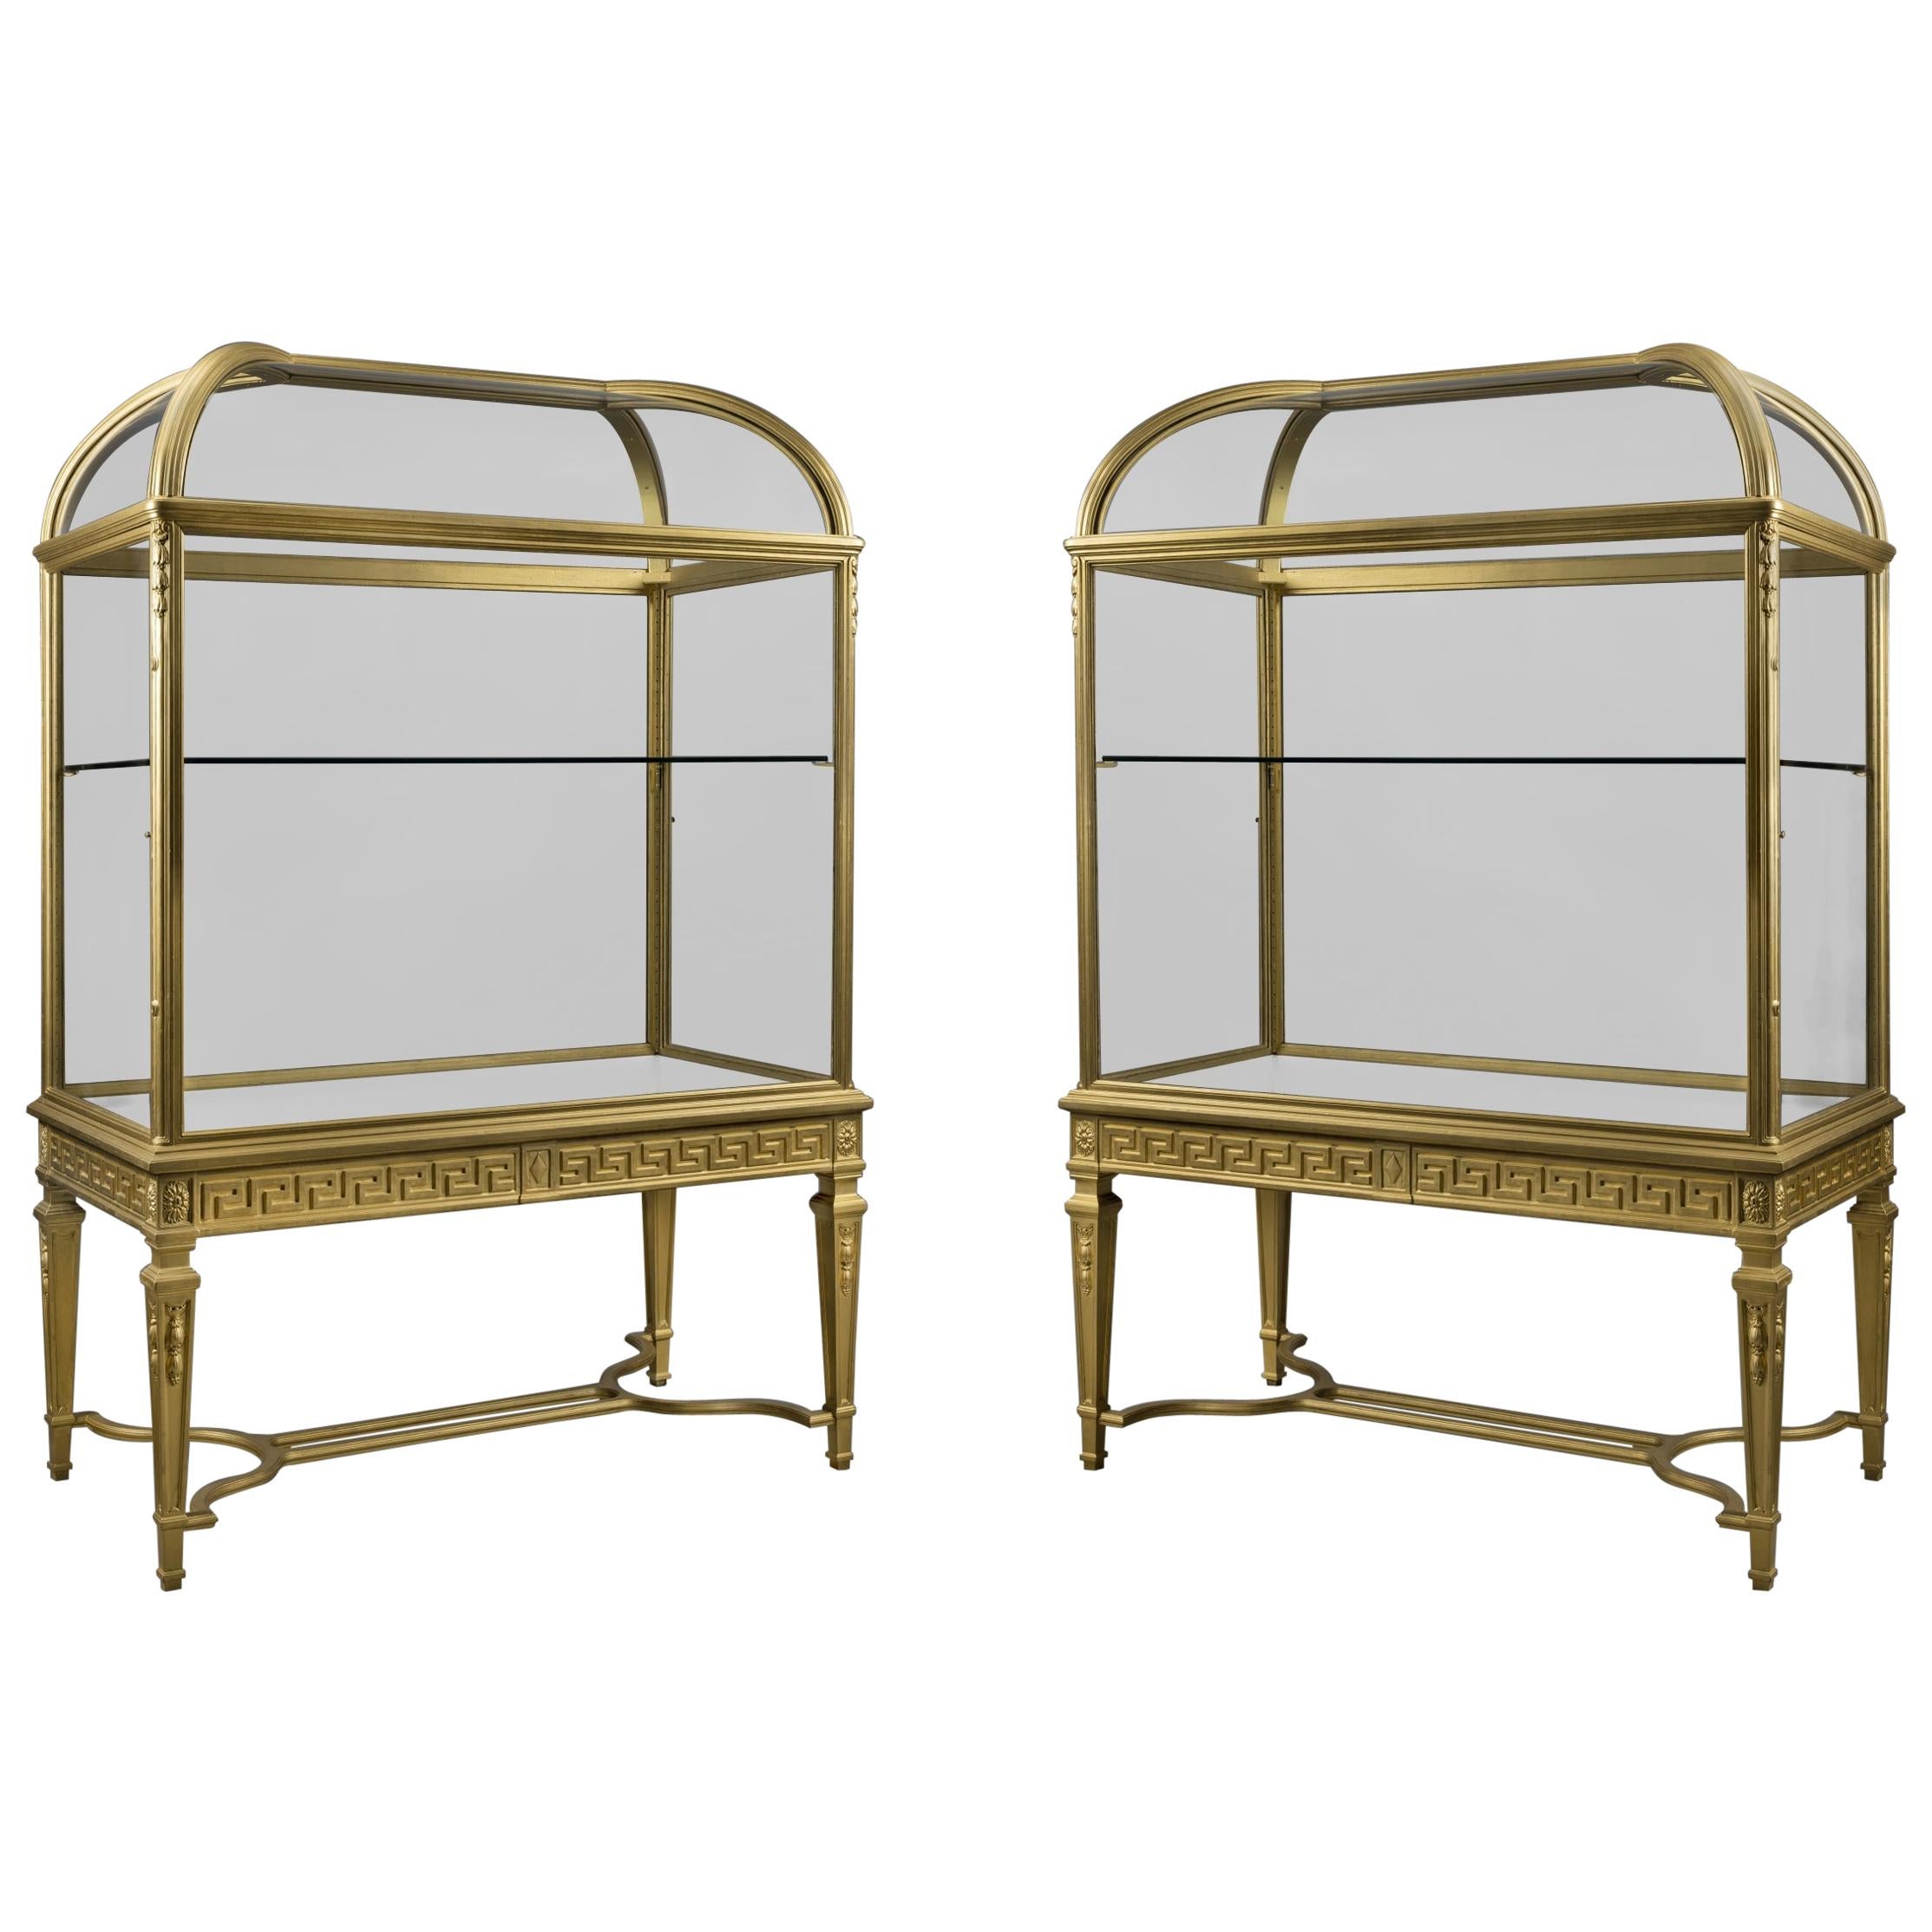 Pair of Giltwood Domed Top Display Cabinets, circa 1900